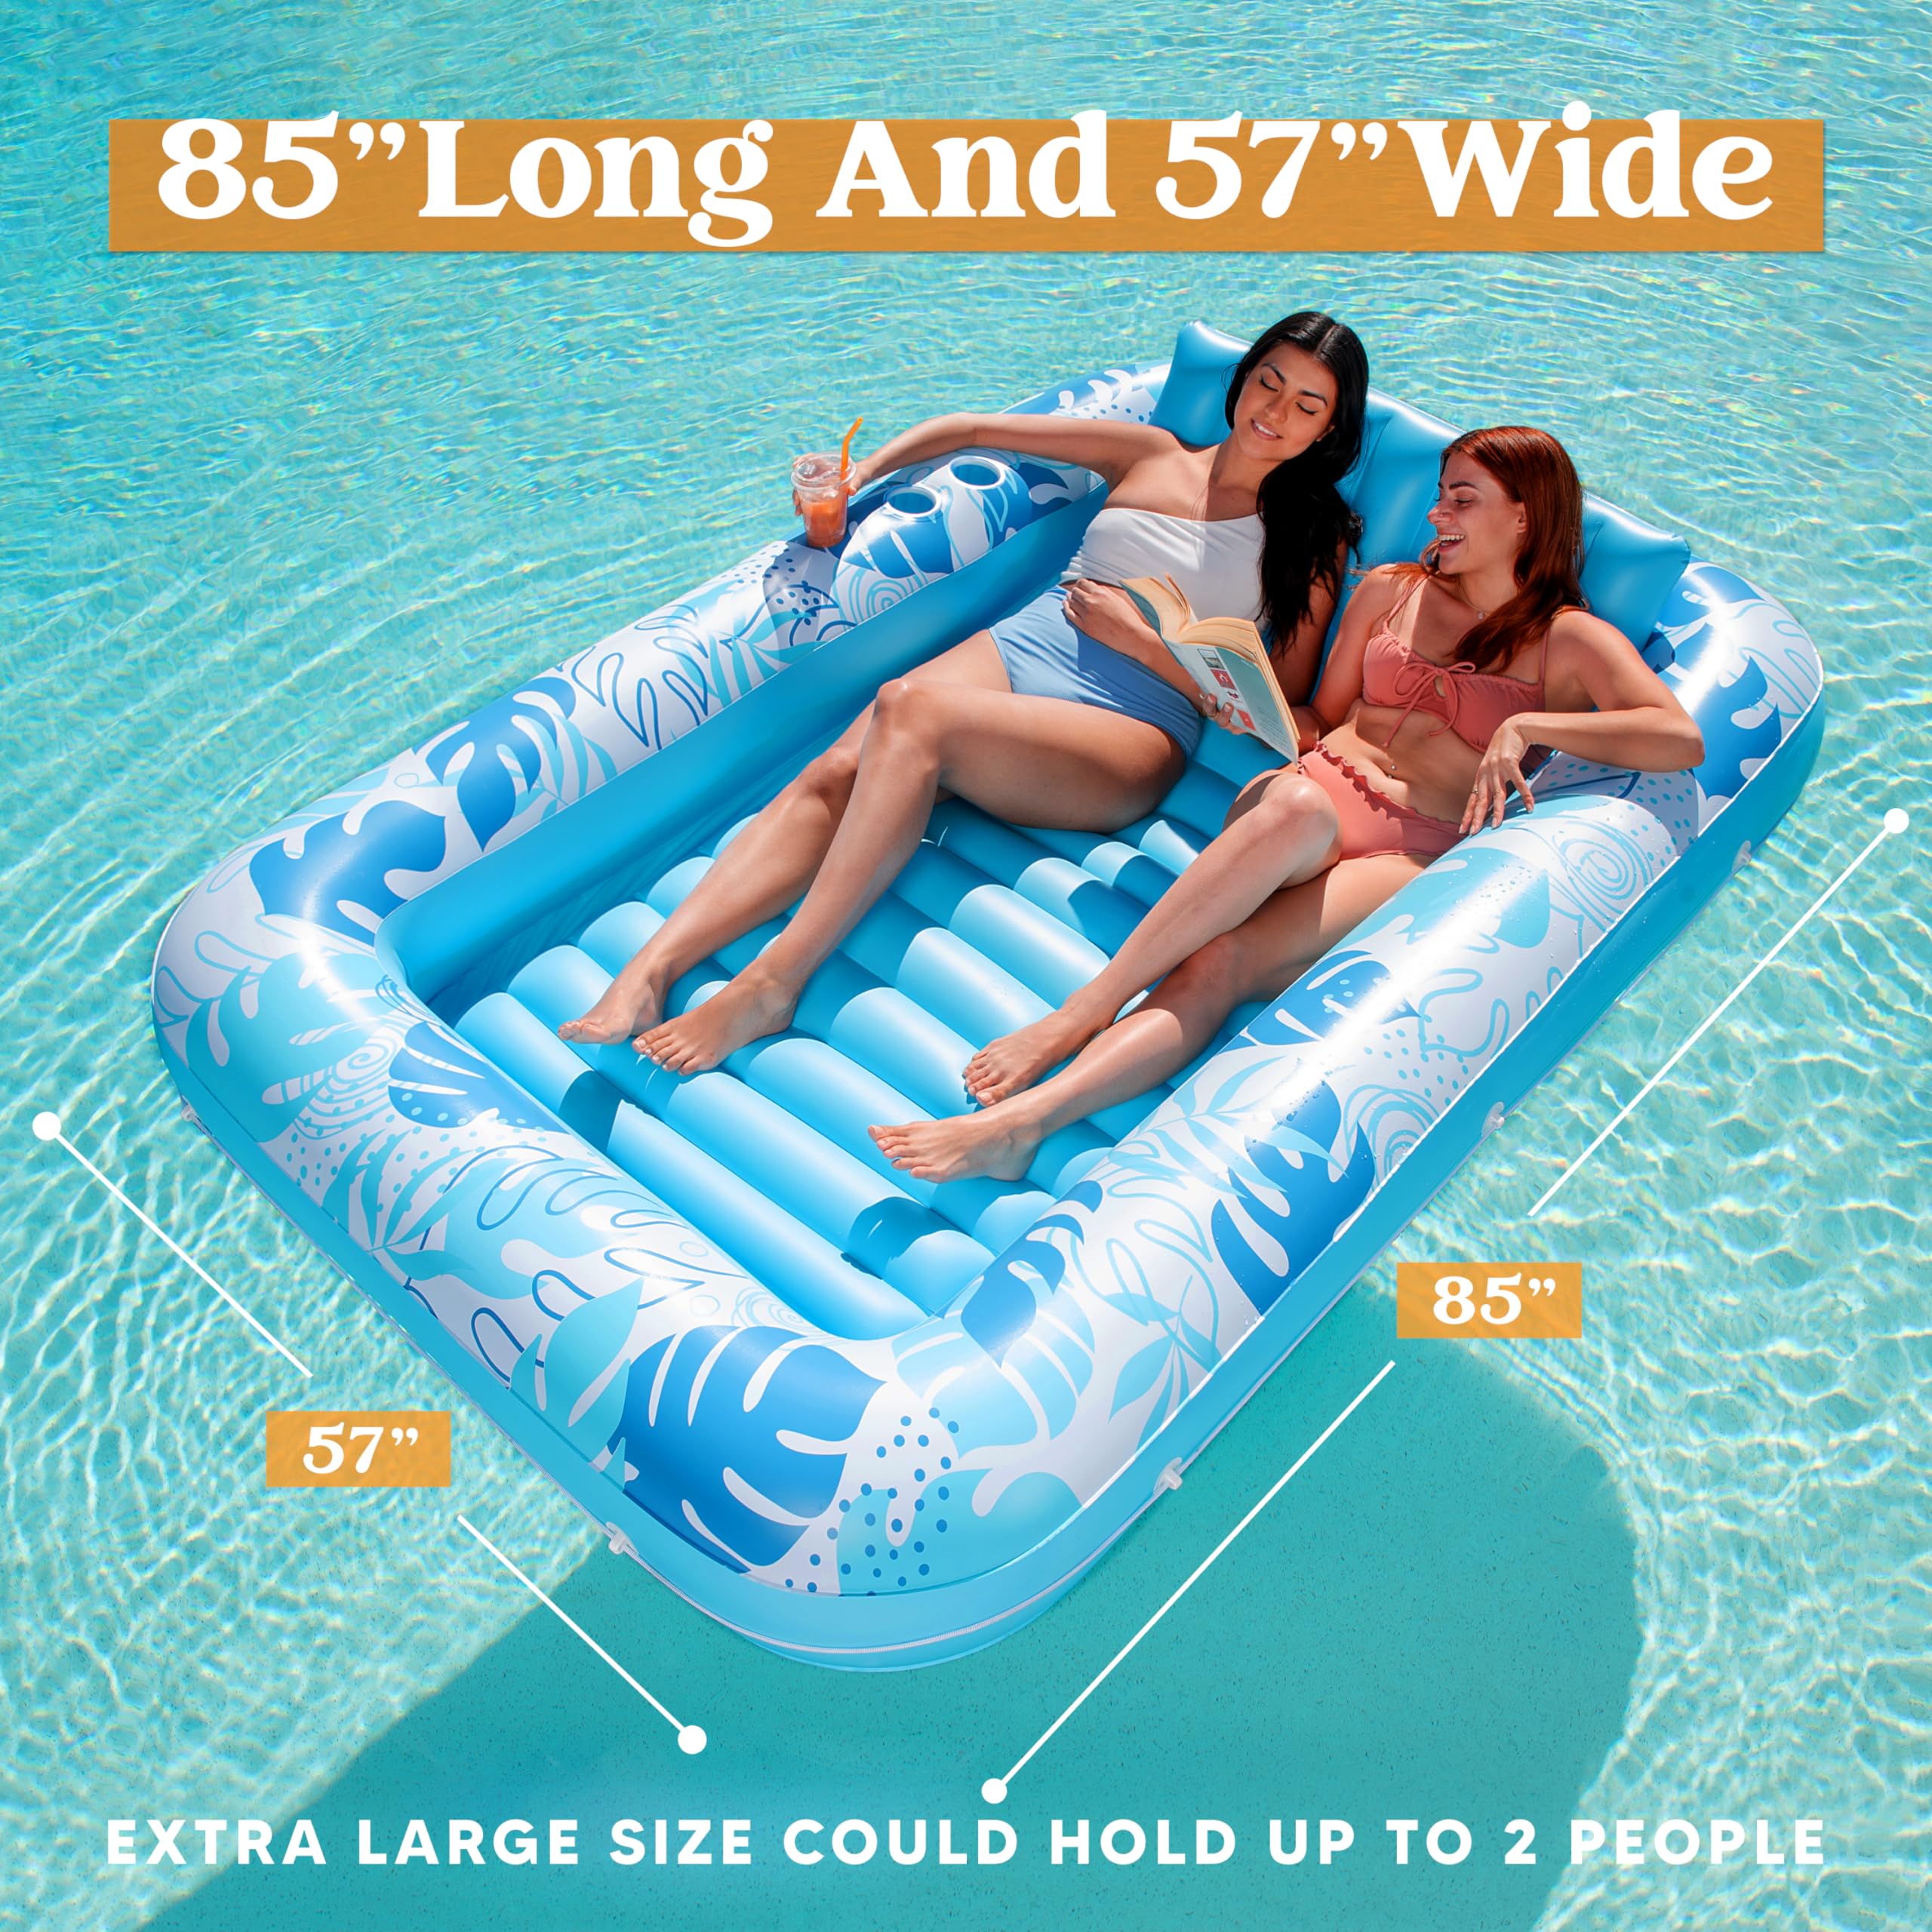 Sloosh Inflatable Tanning Pool Lounger Float-XL, 85" x 57" Extra Large Suntan Sun Tan tub for Adults, Bed Blow up, Raft Lounge Floatie, XL-Blue $33.99